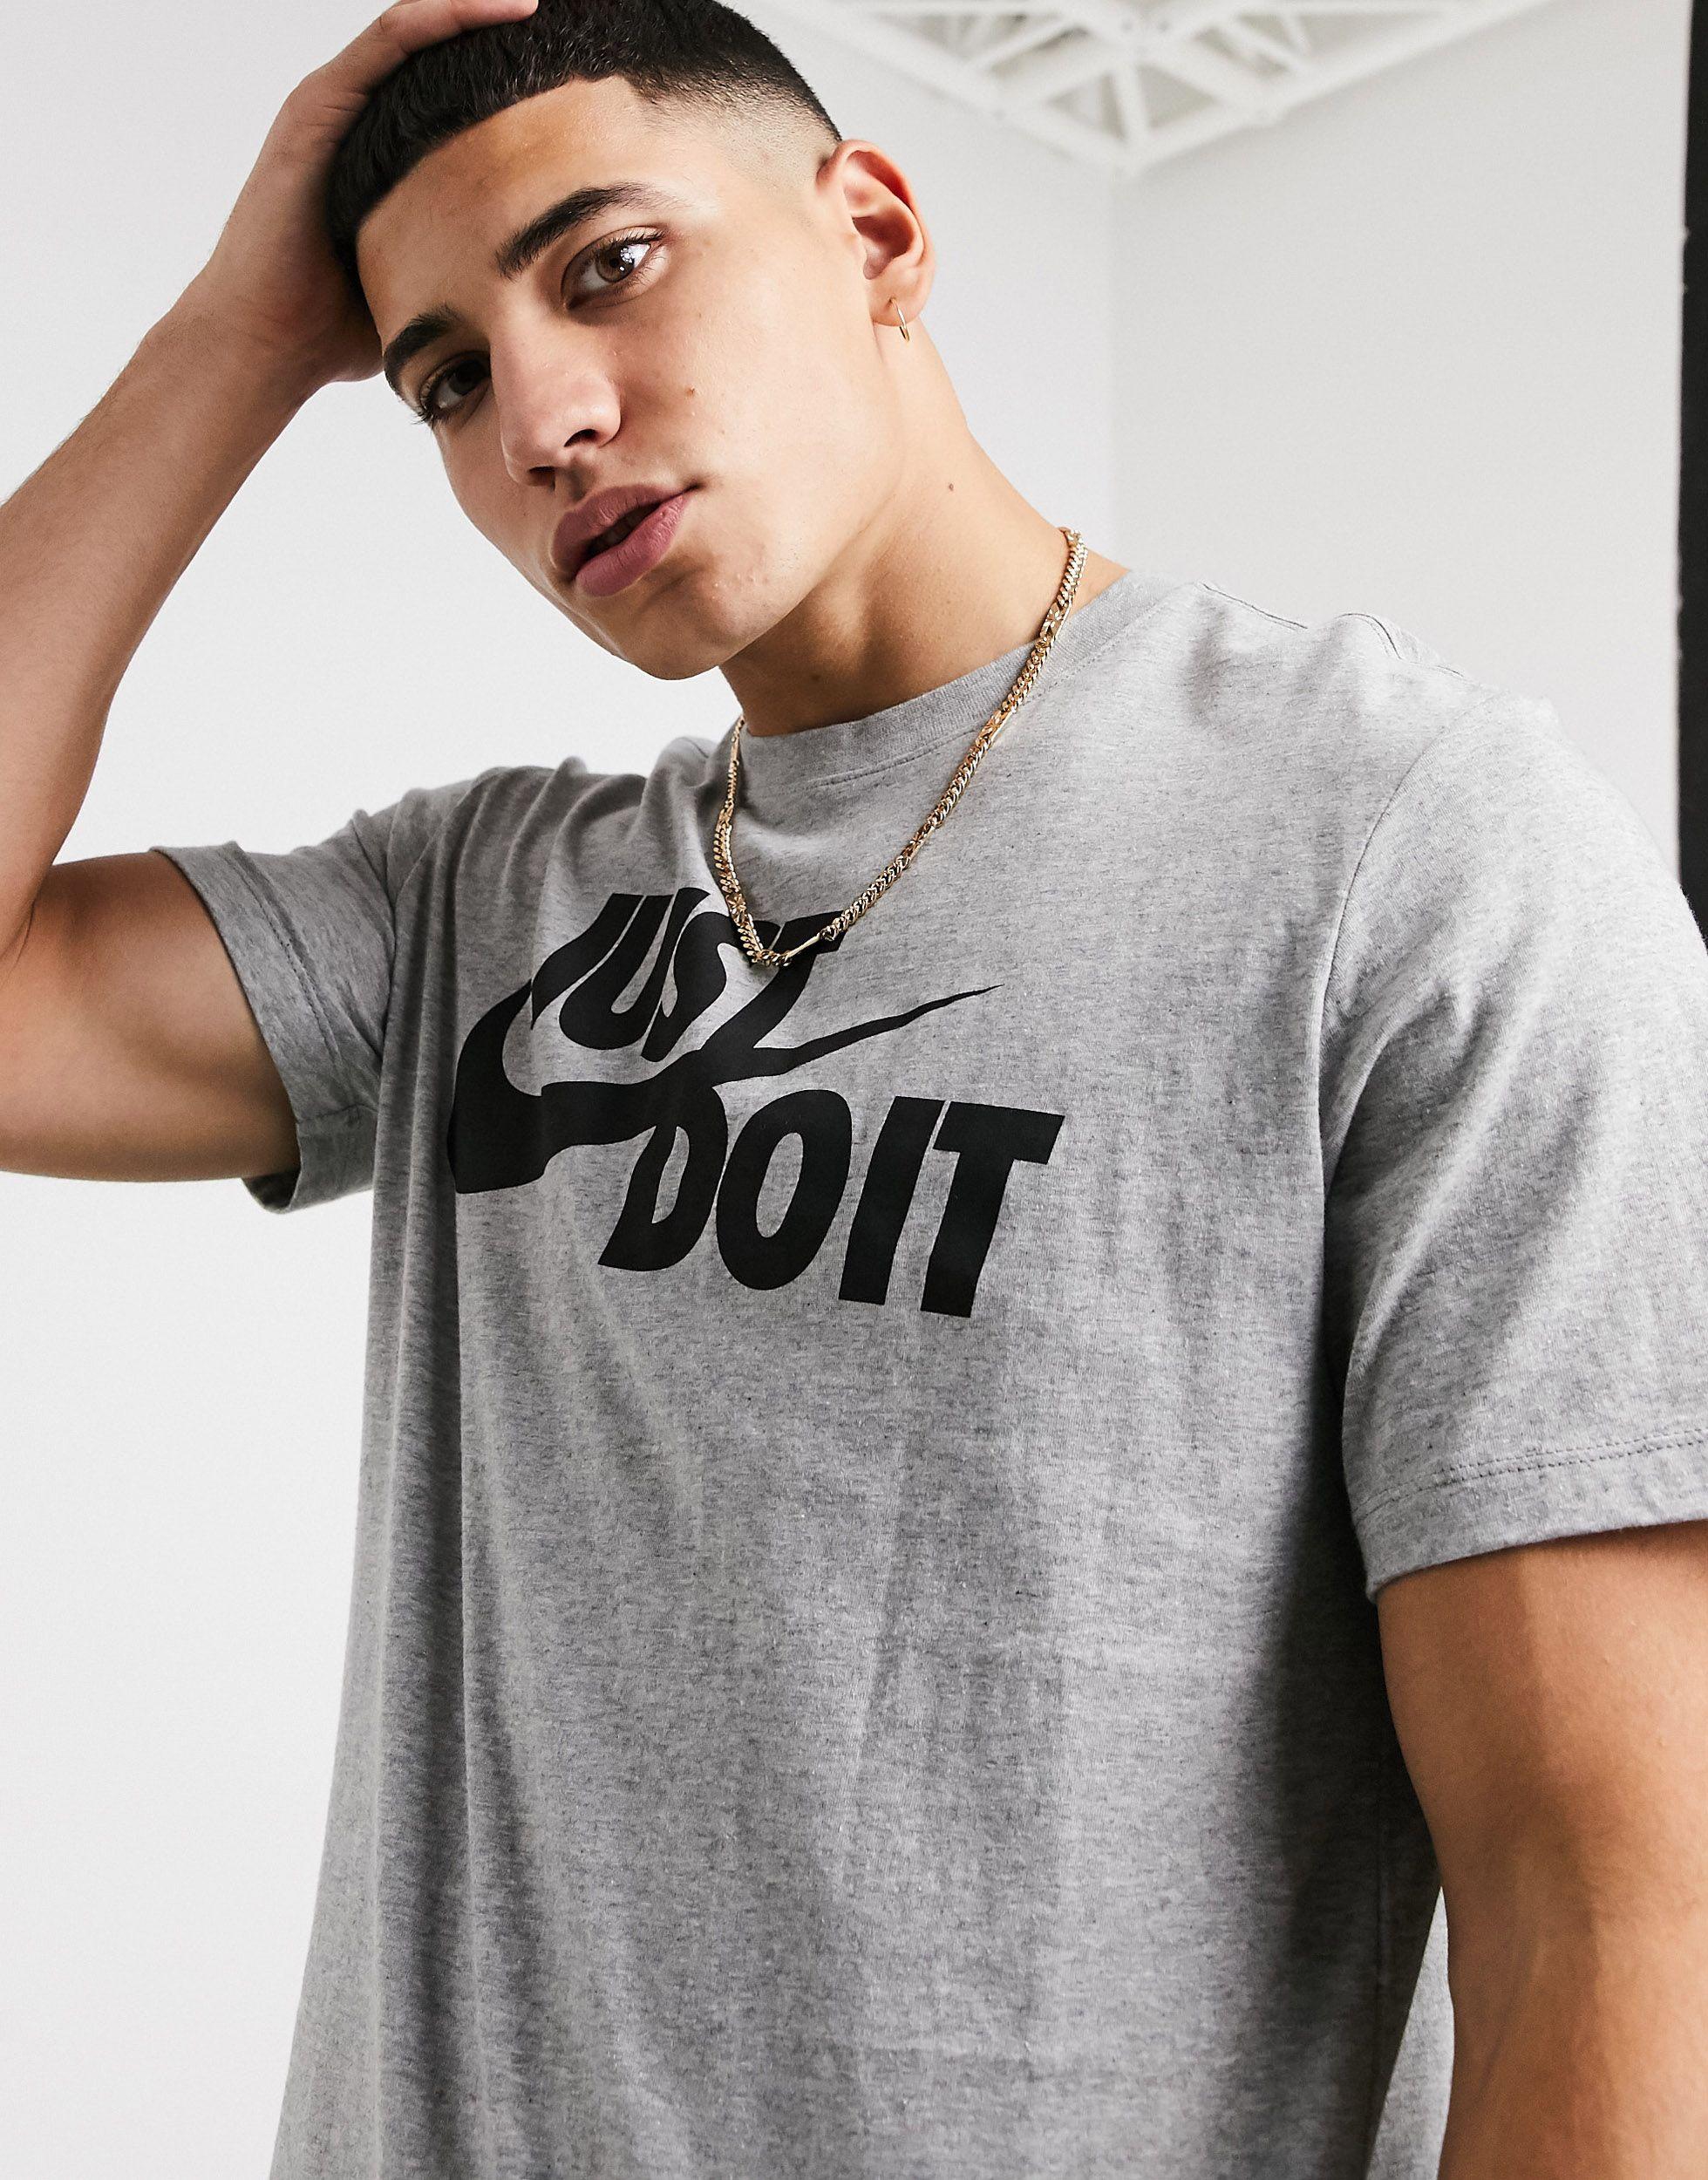 Nike Cotton Just Do It Swoosh T-shirt in Dark Grey Heather,Black (Gray) for  Men - Save 32% | Lyst